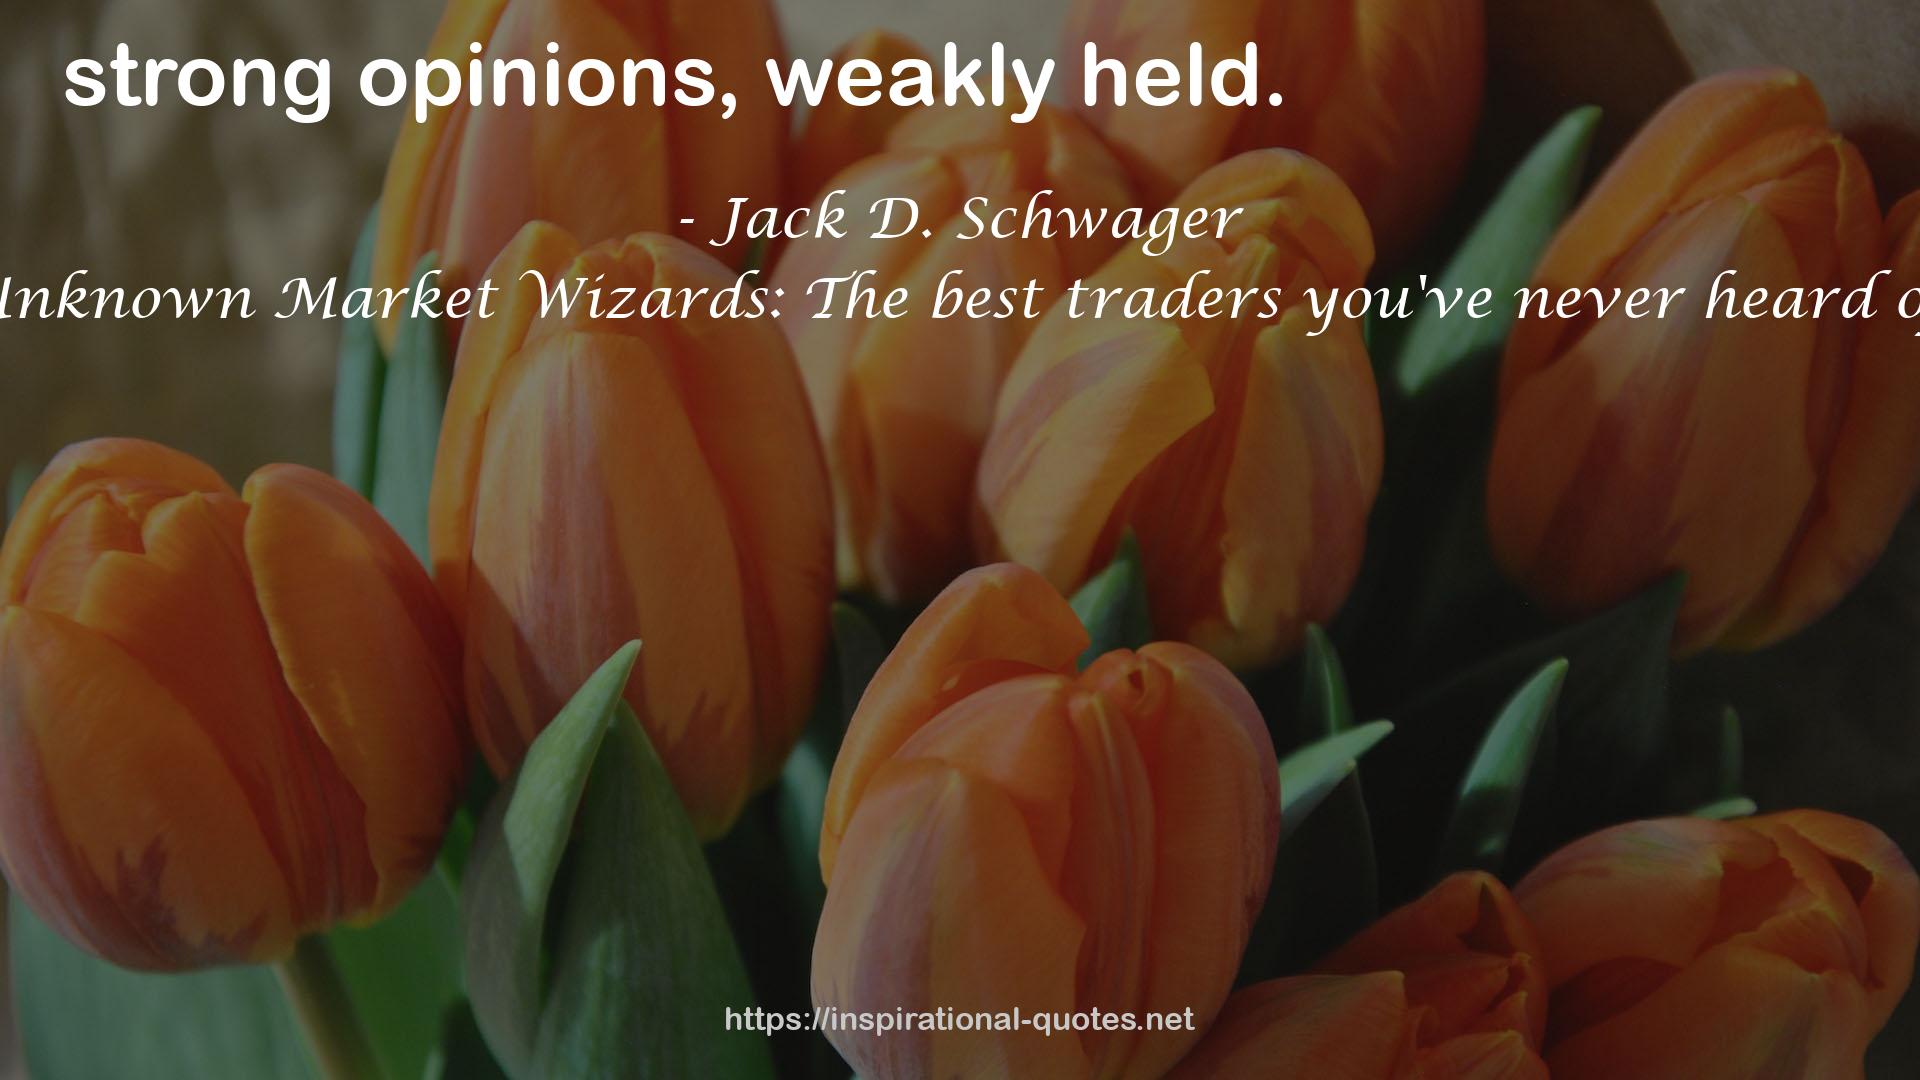 Unknown Market Wizards: The best traders you've never heard of QUOTES